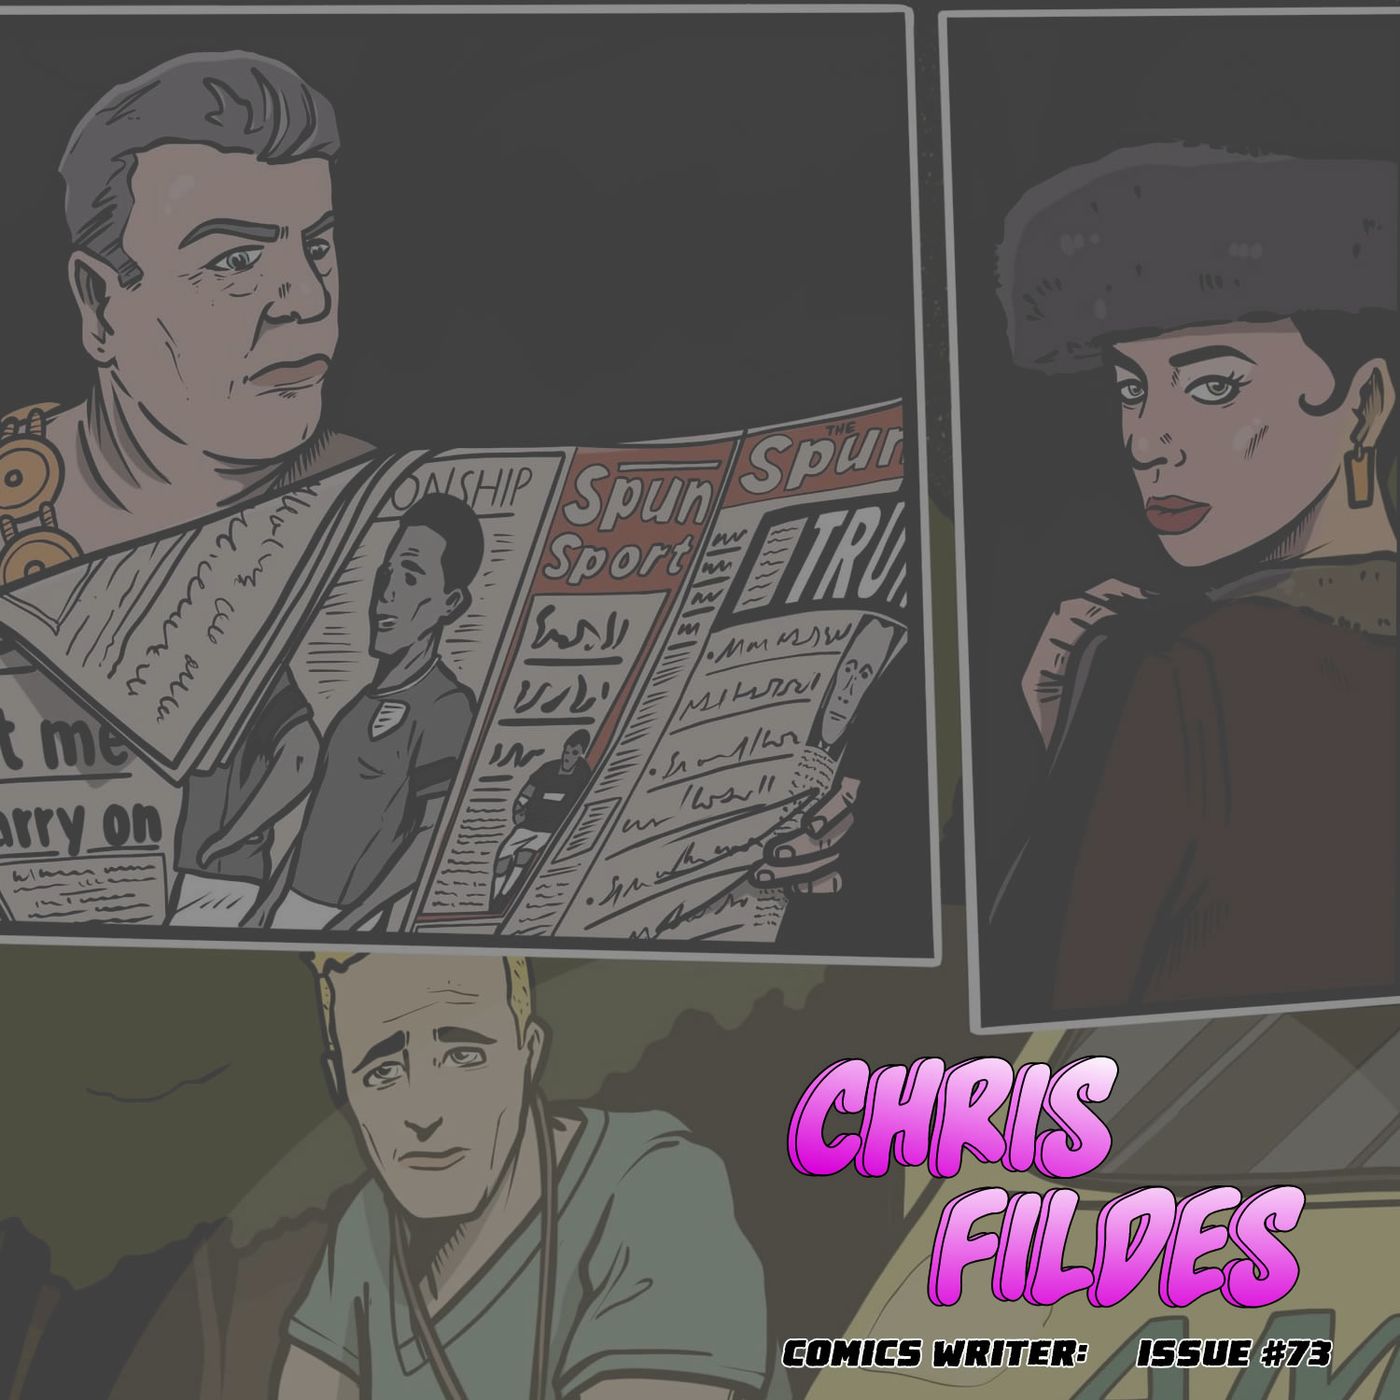 Chris Fildes on writing queer comics, the queer scene, comics in the UK, and writing technique